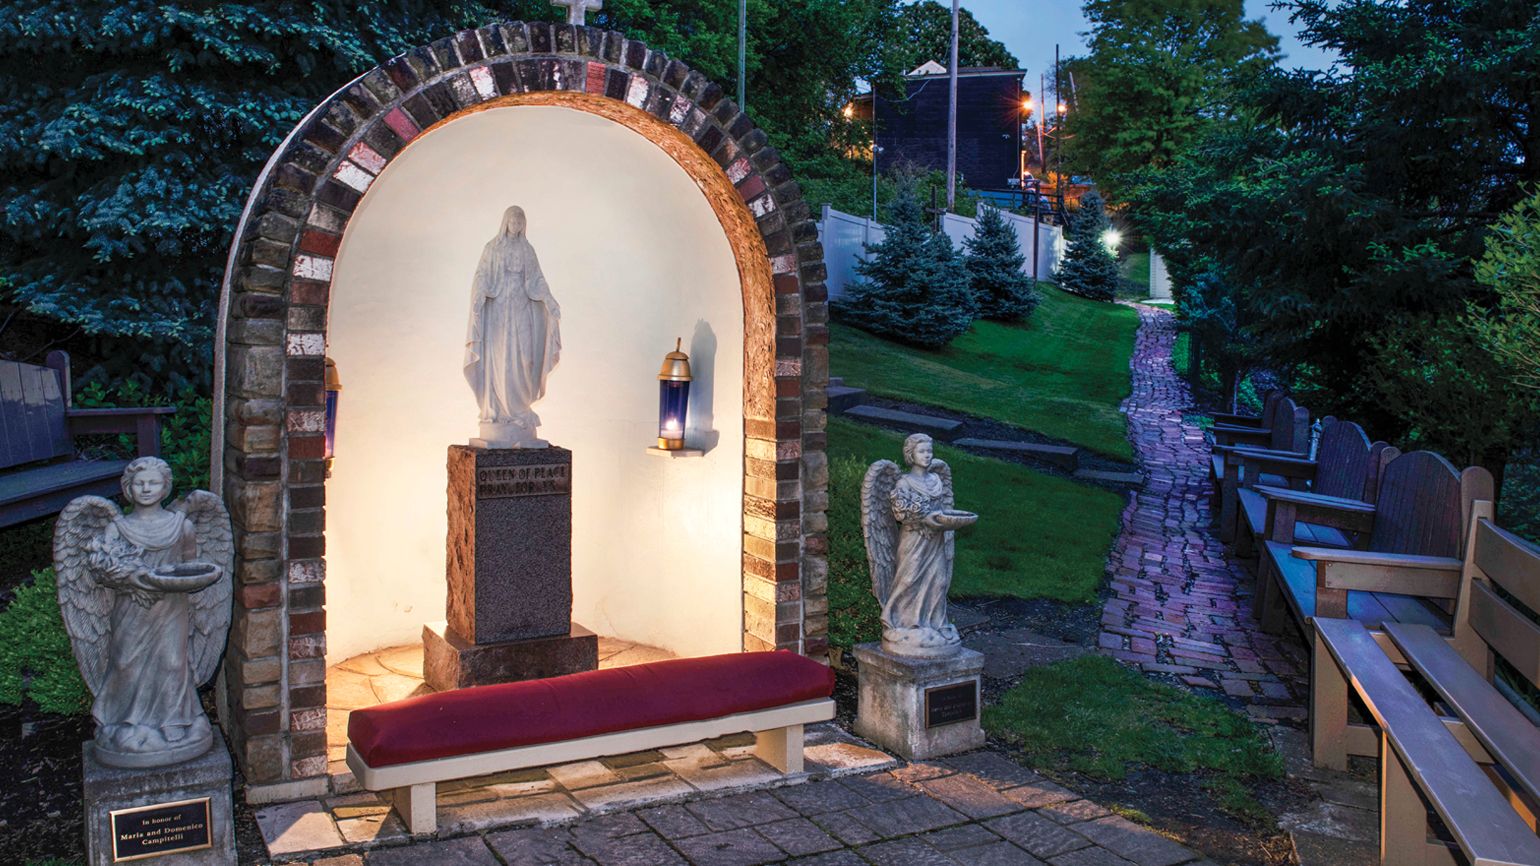 Shrine of the Blessed Mother in Pittsburgh PA; Photo credit: Scott Goldsmith